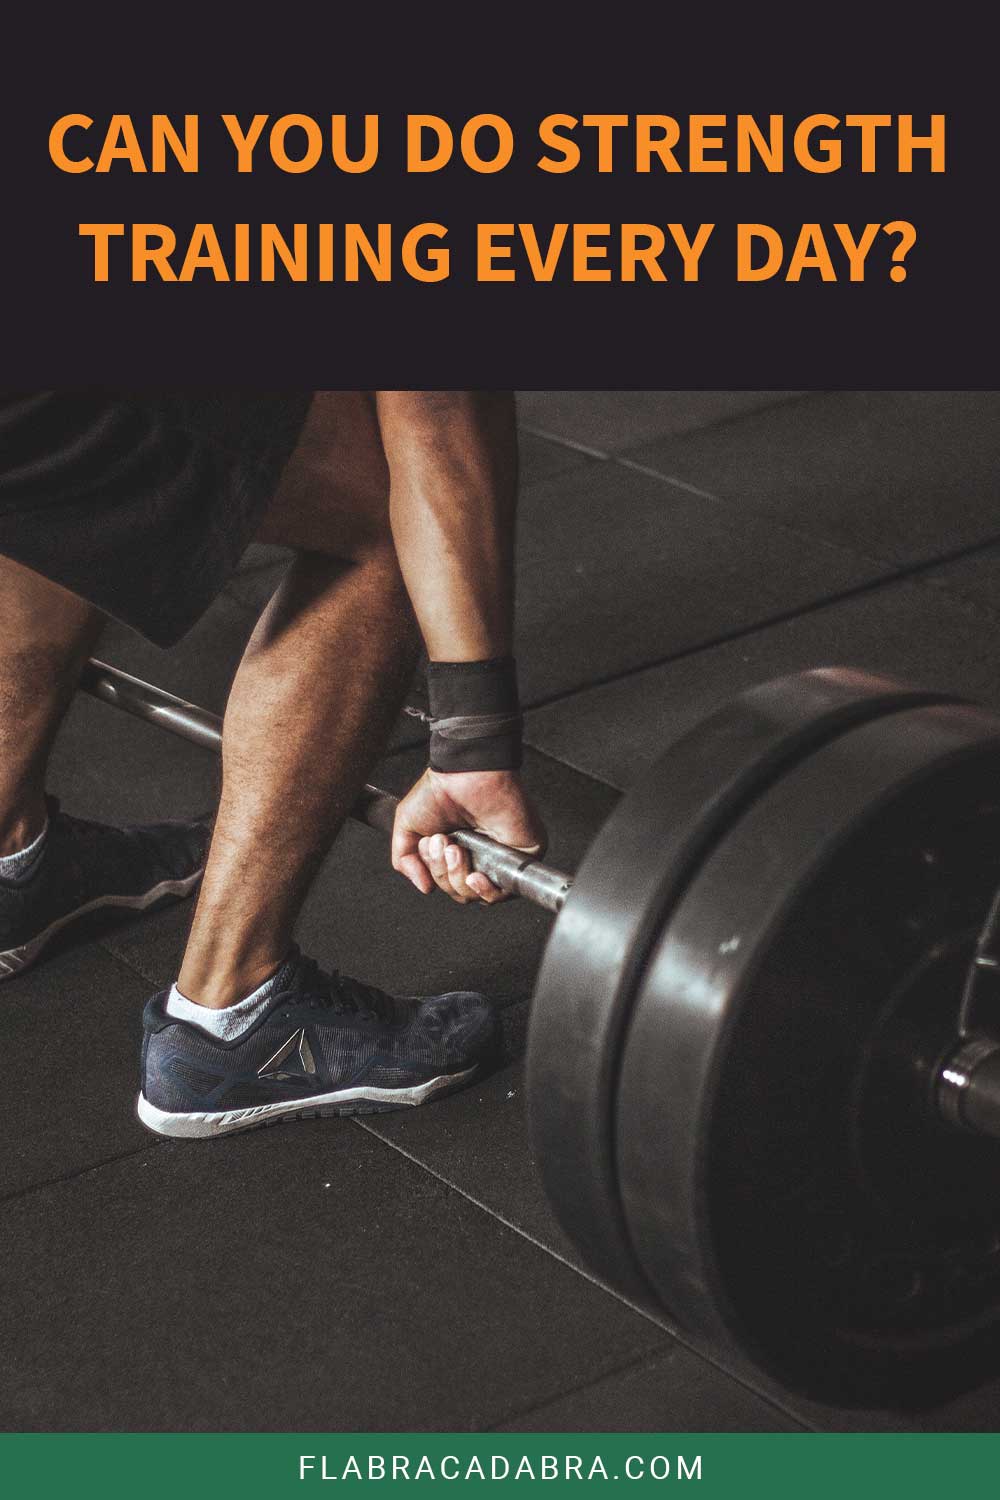 Can You Do Strength Training Every Day?